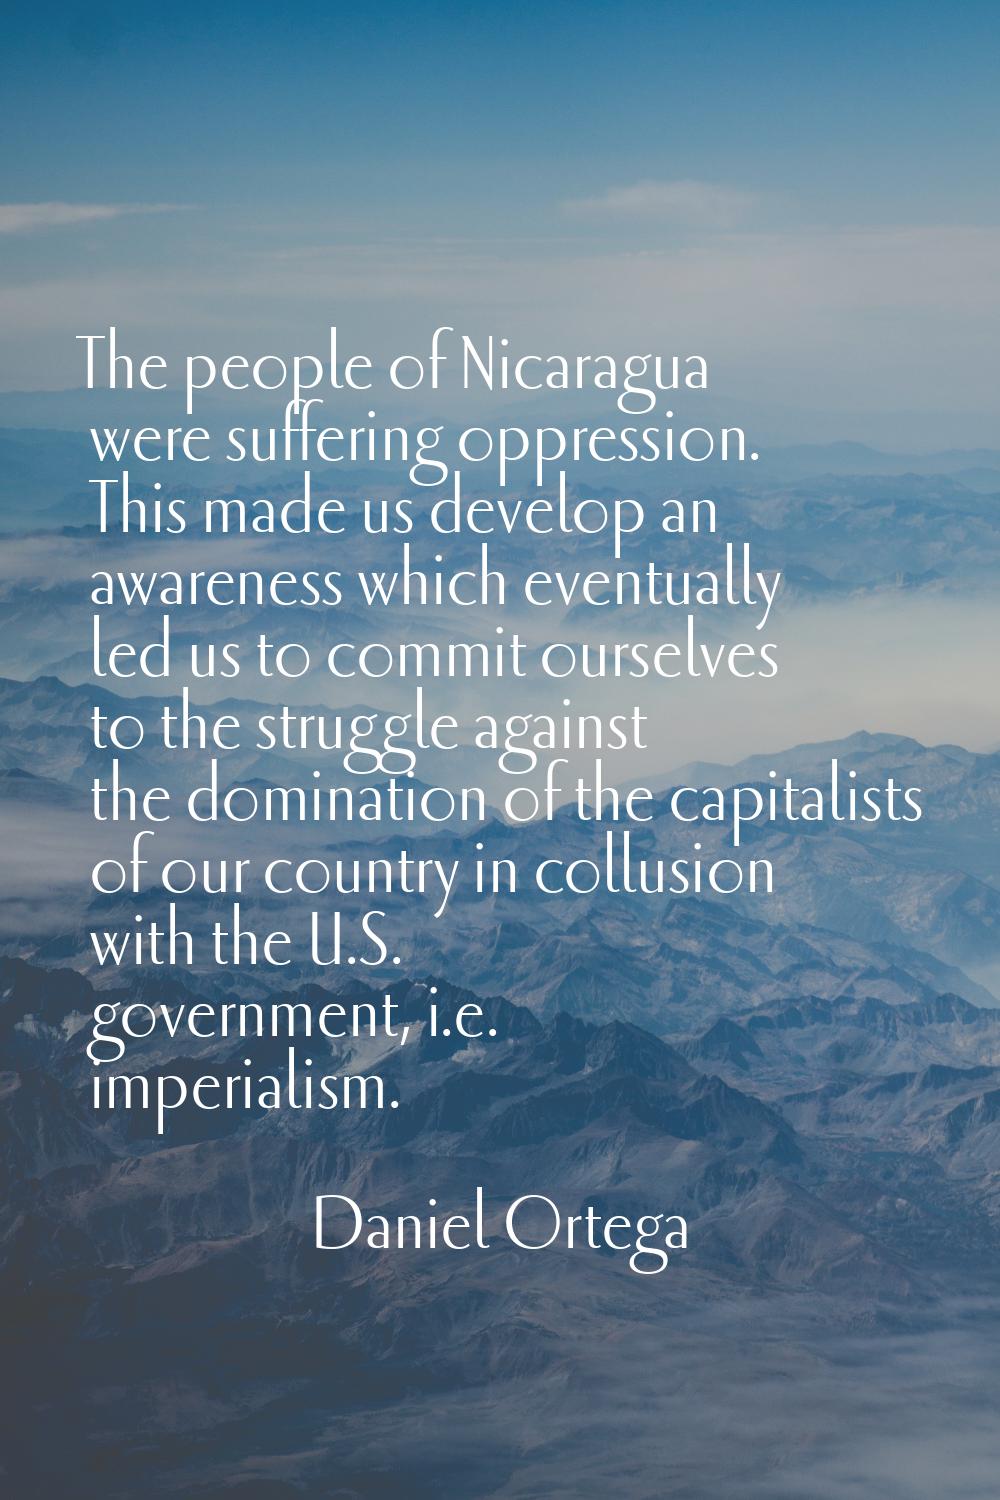 The people of Nicaragua were suffering oppression. This made us develop an awareness which eventual